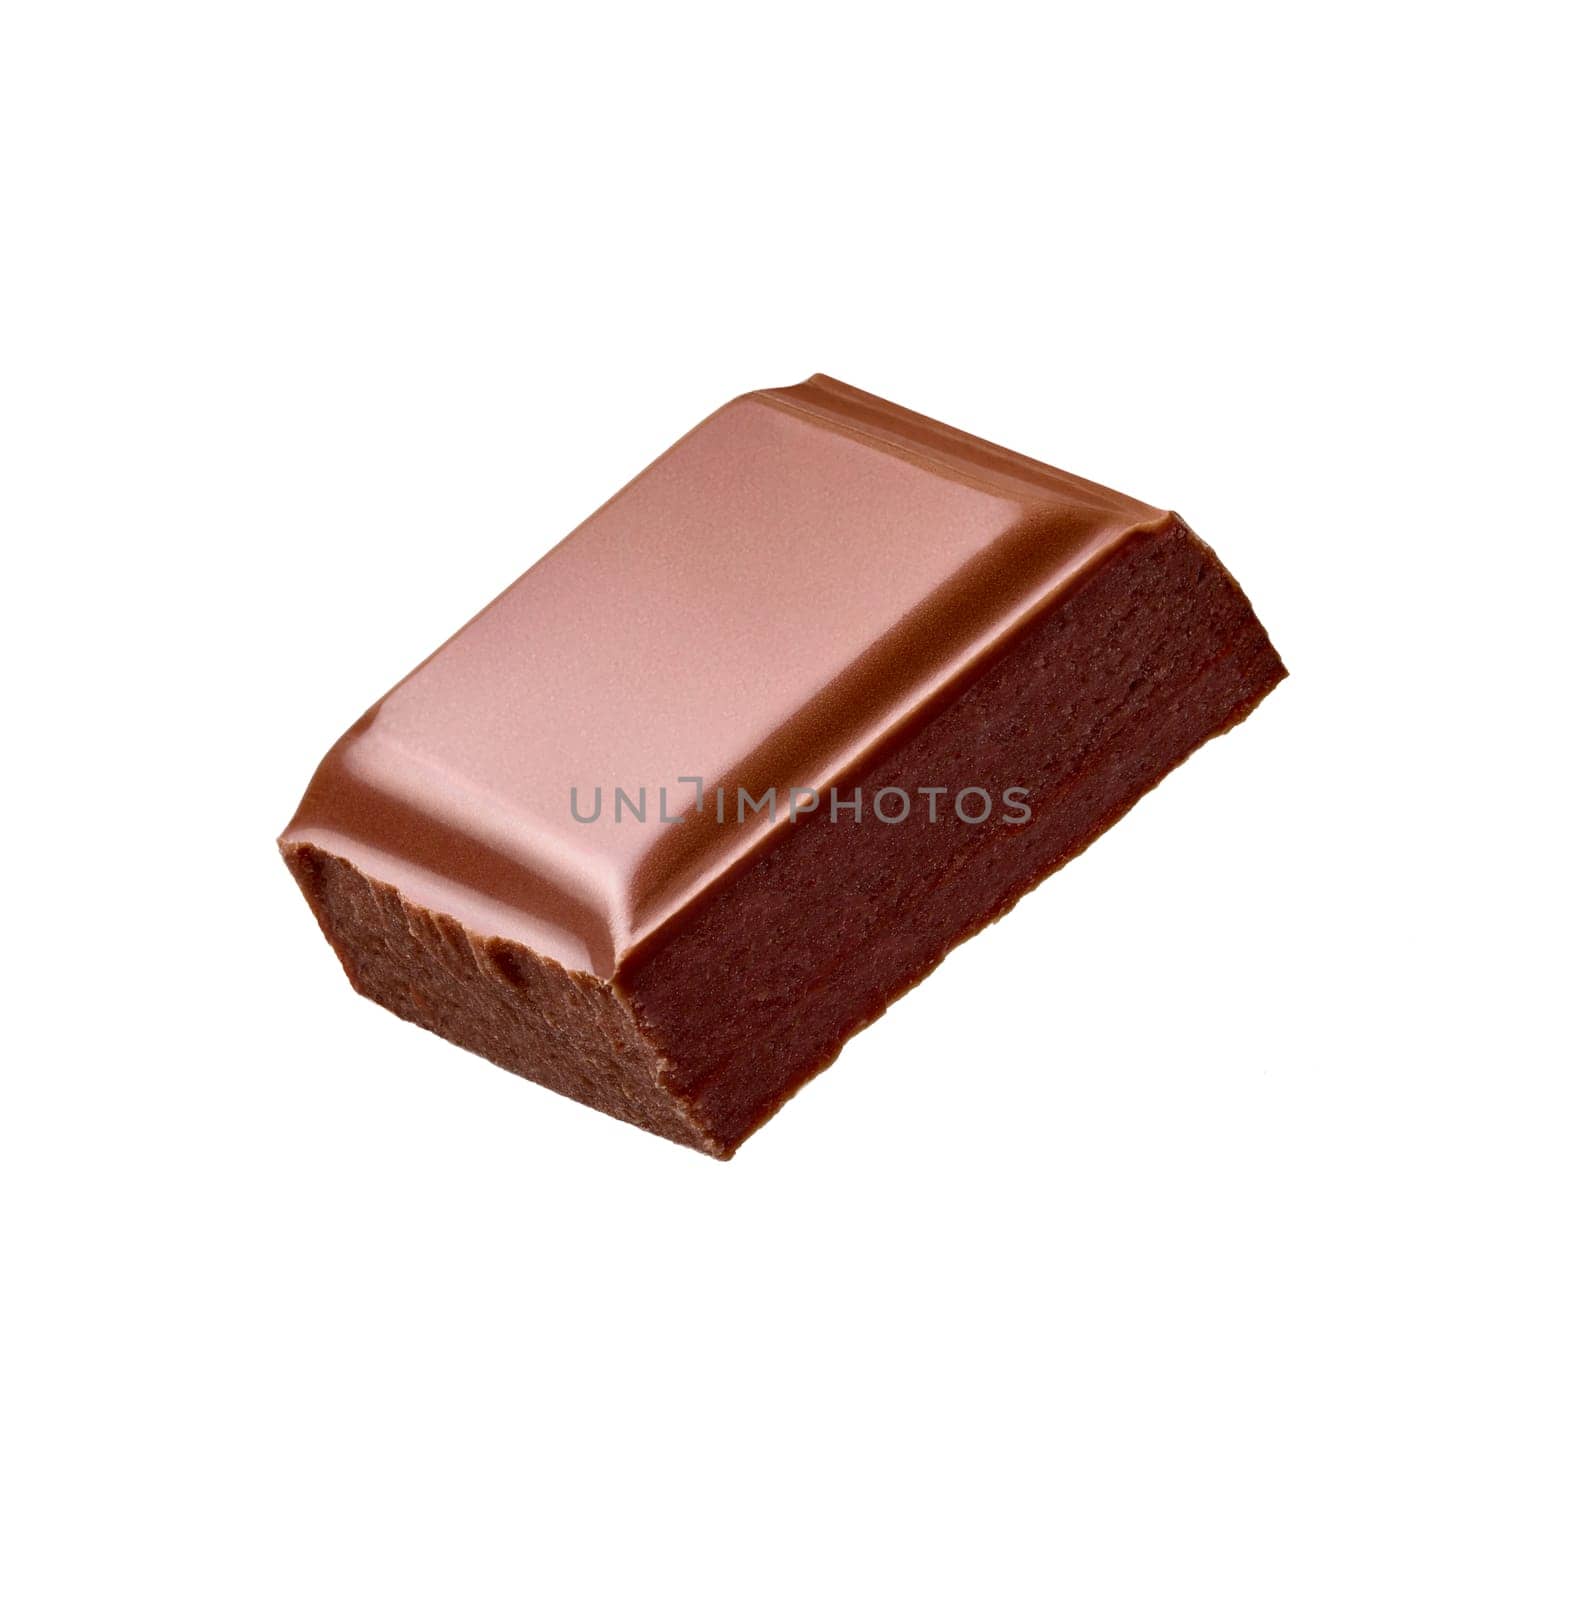 close up of chocolate pieces stack falling on white background